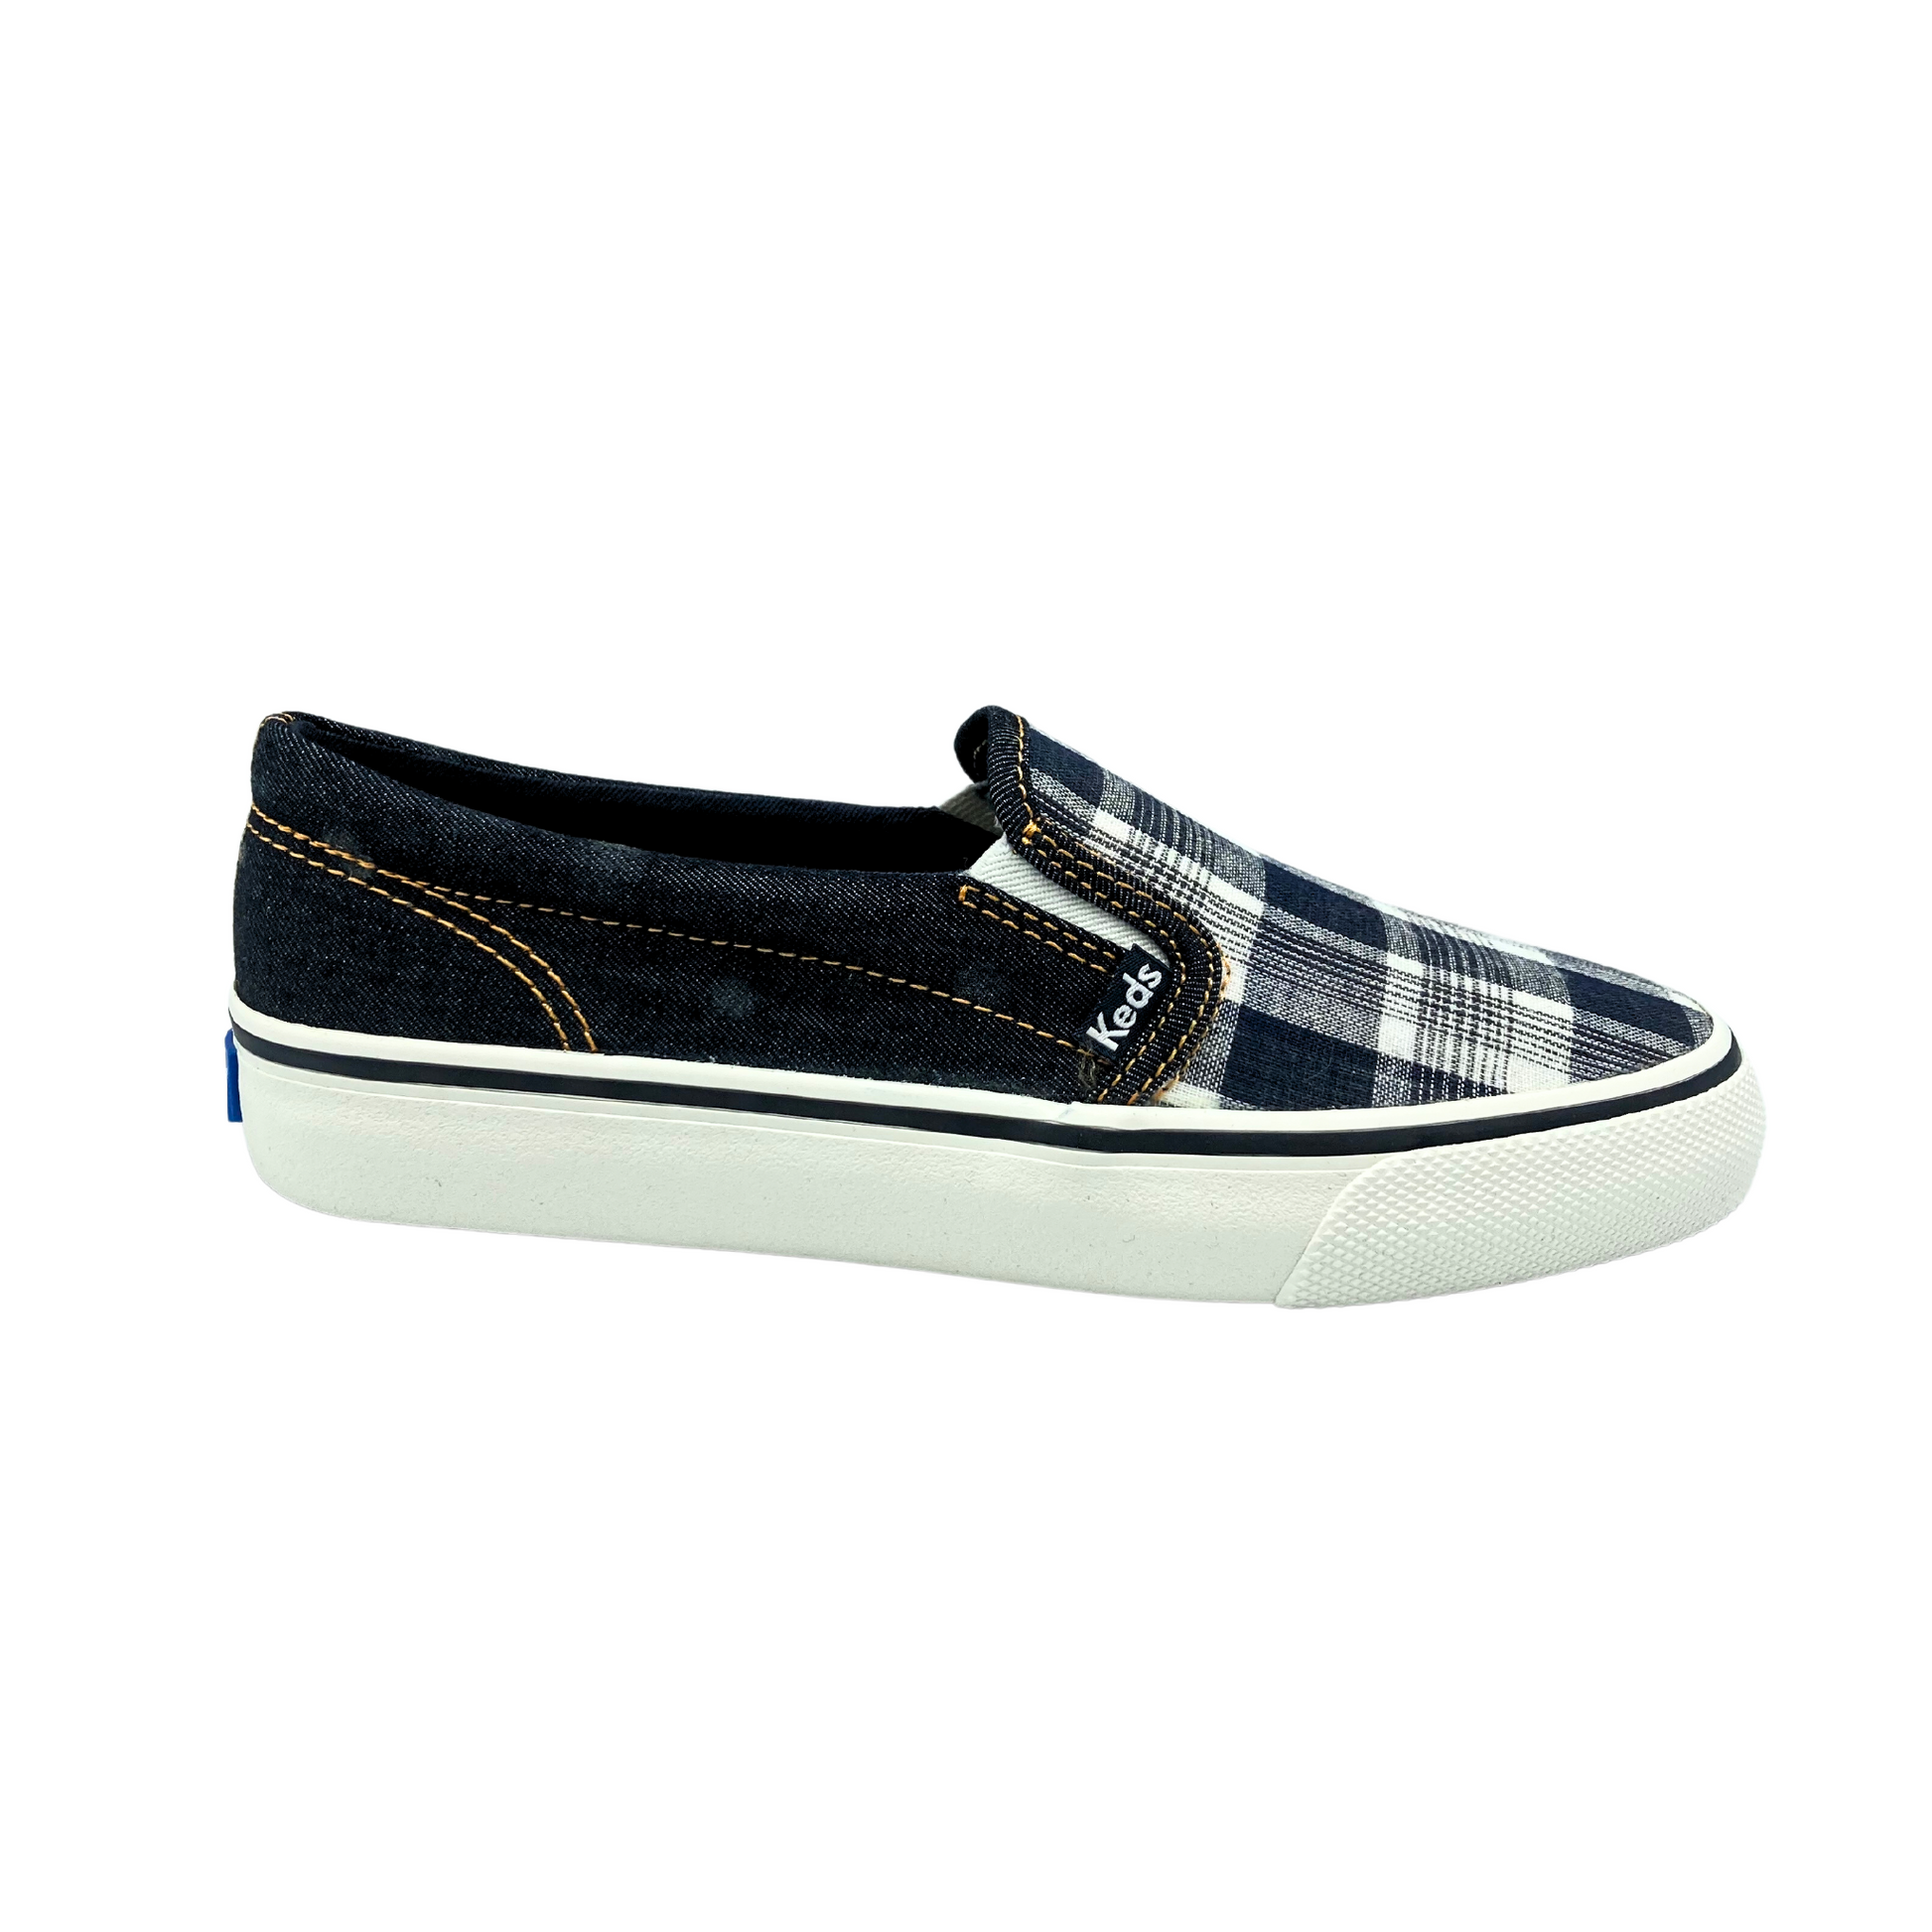 Outside view of a canvas slip on sneaker in a black plaid colorway.  Black plaid on top of foot.  Sides and back are in the black denim.  Outsole is white rubber with a black stripe around the top